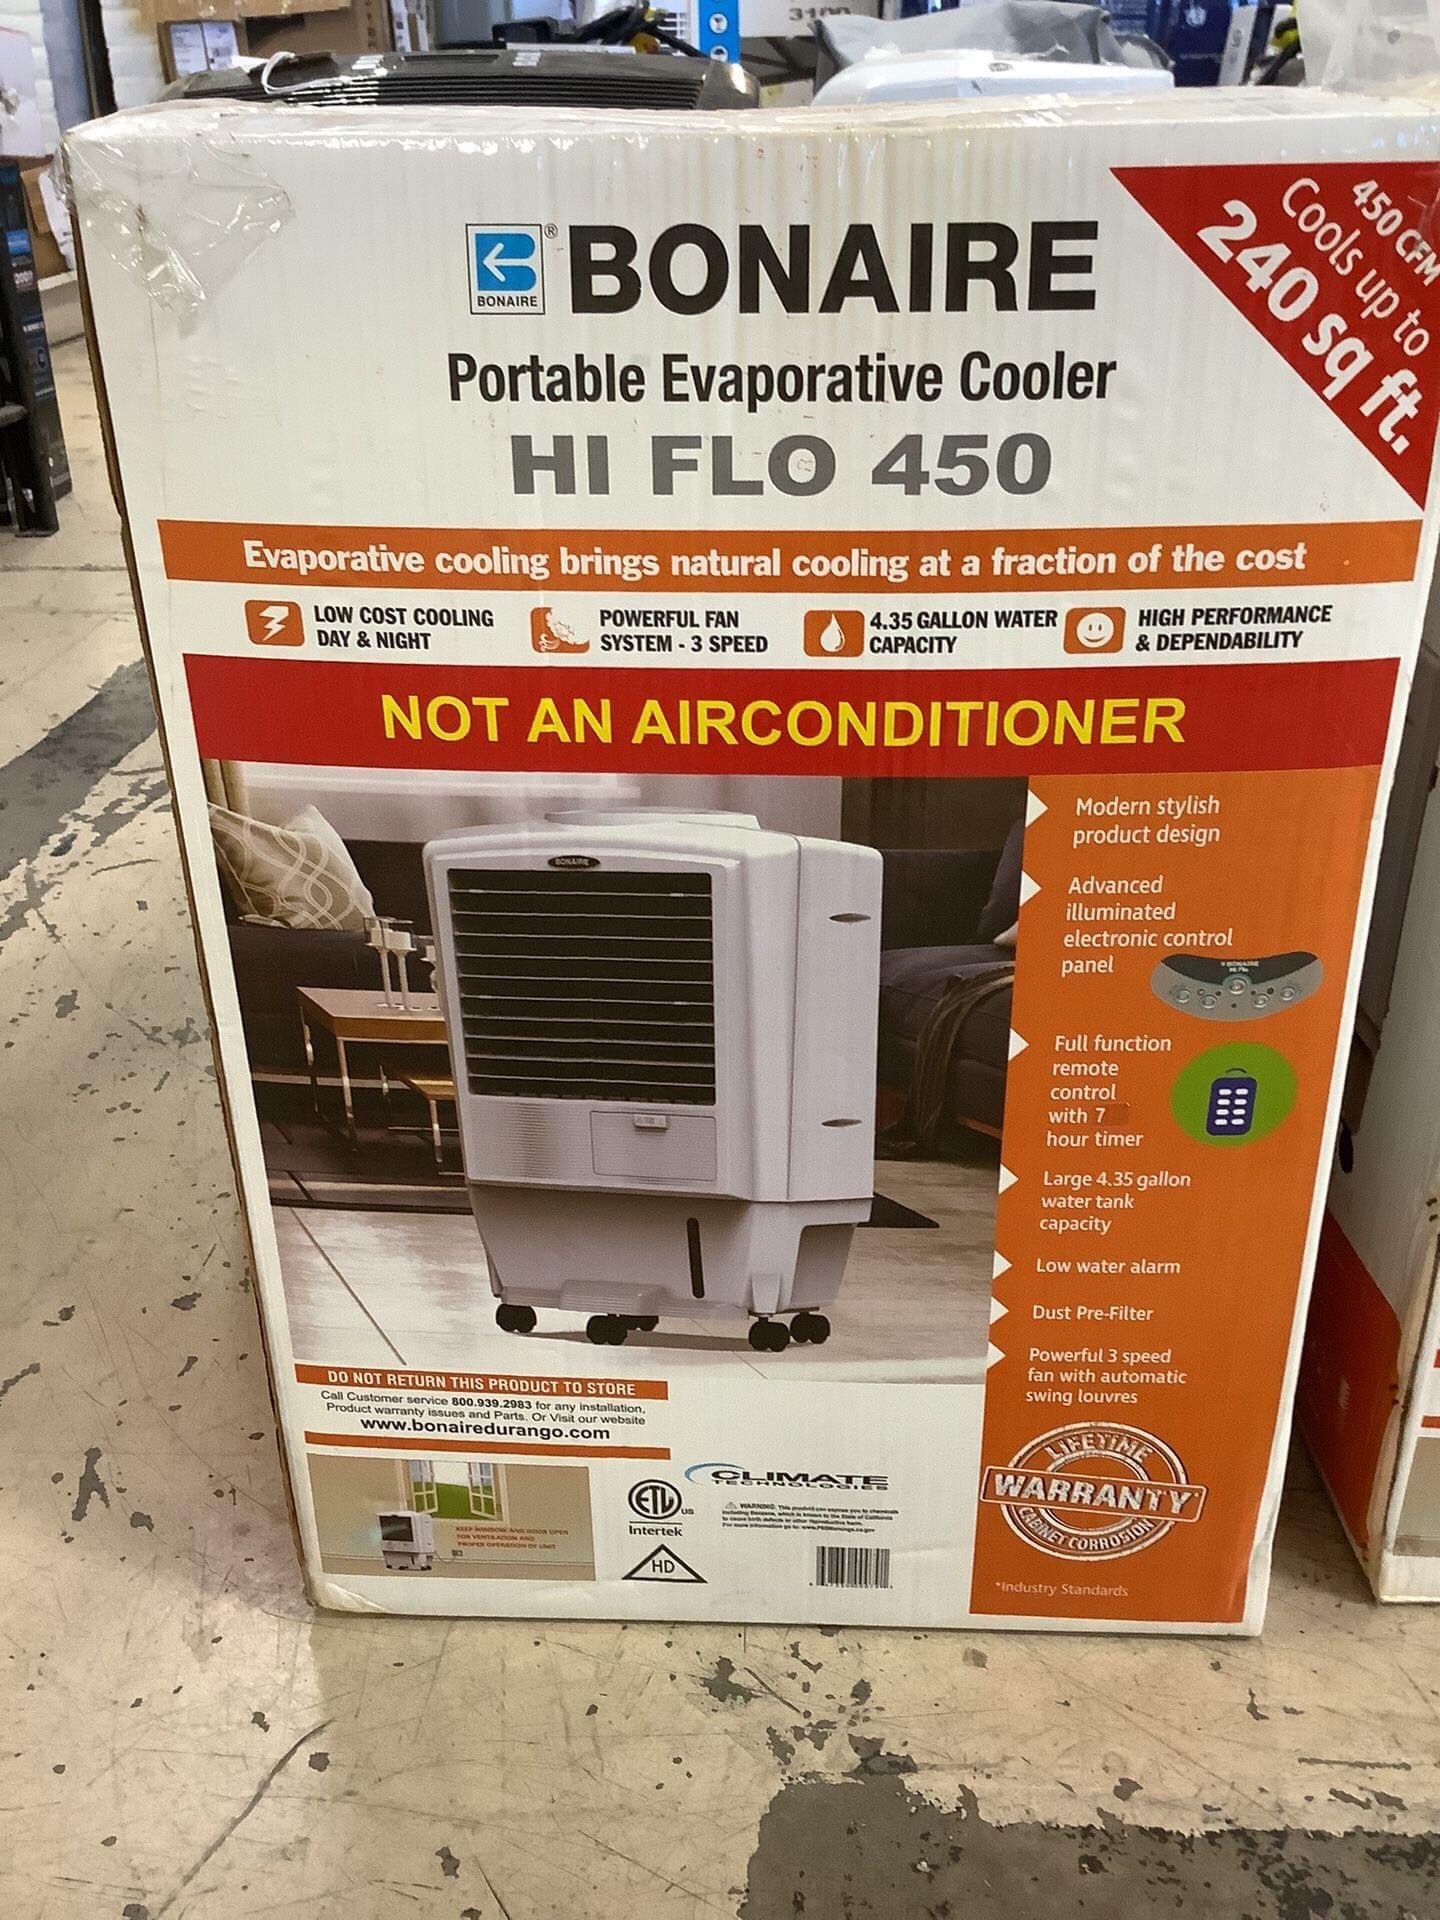 Portable Air Conditioners & Evaporative Coolers (Read Description On Starting Price)